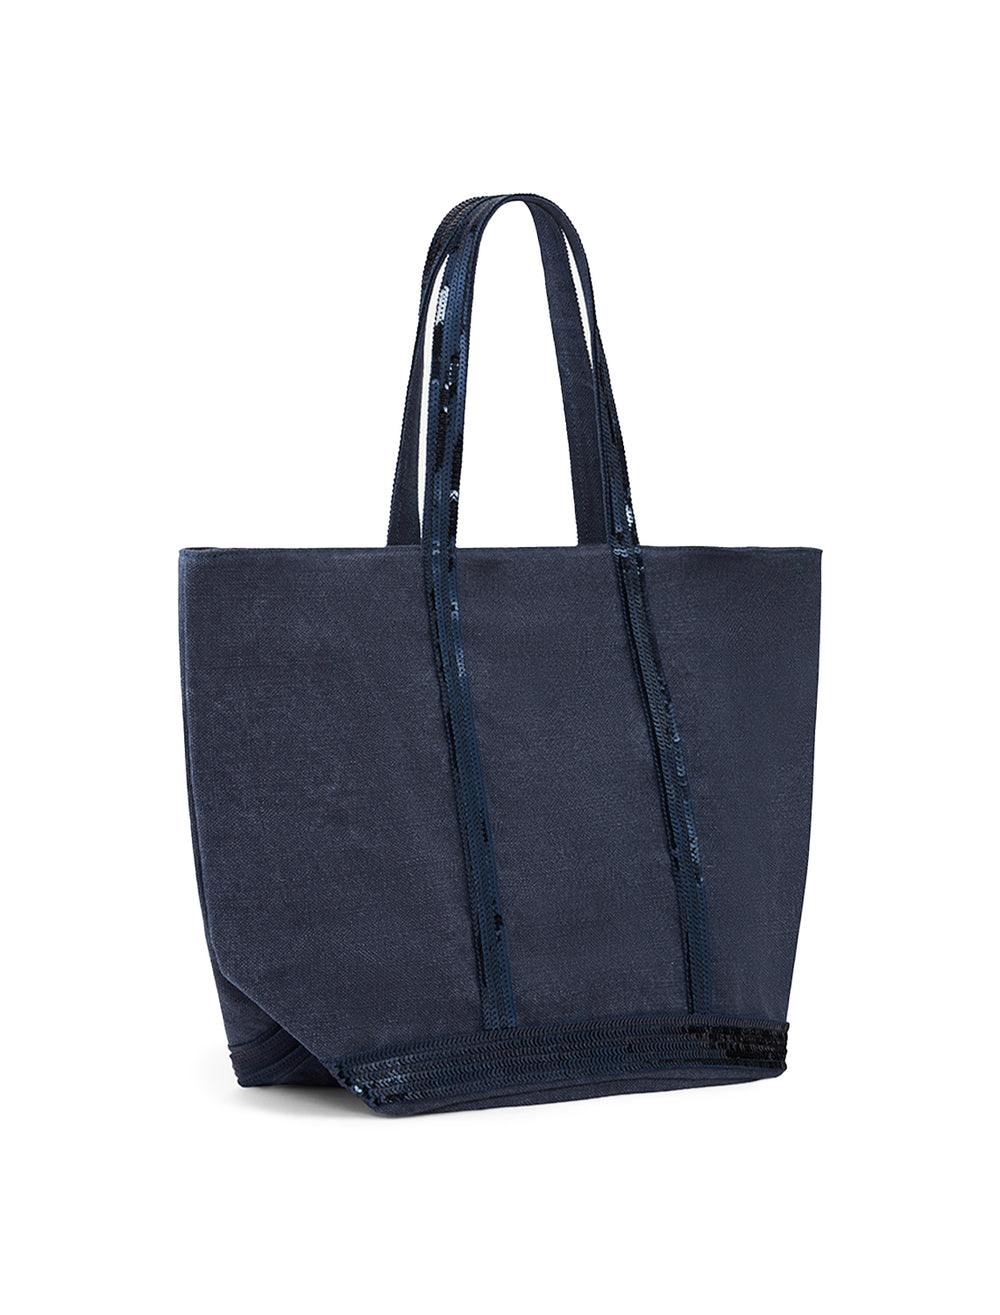 Front angle view of Vanessa Bruno's cabas large tote in denim.